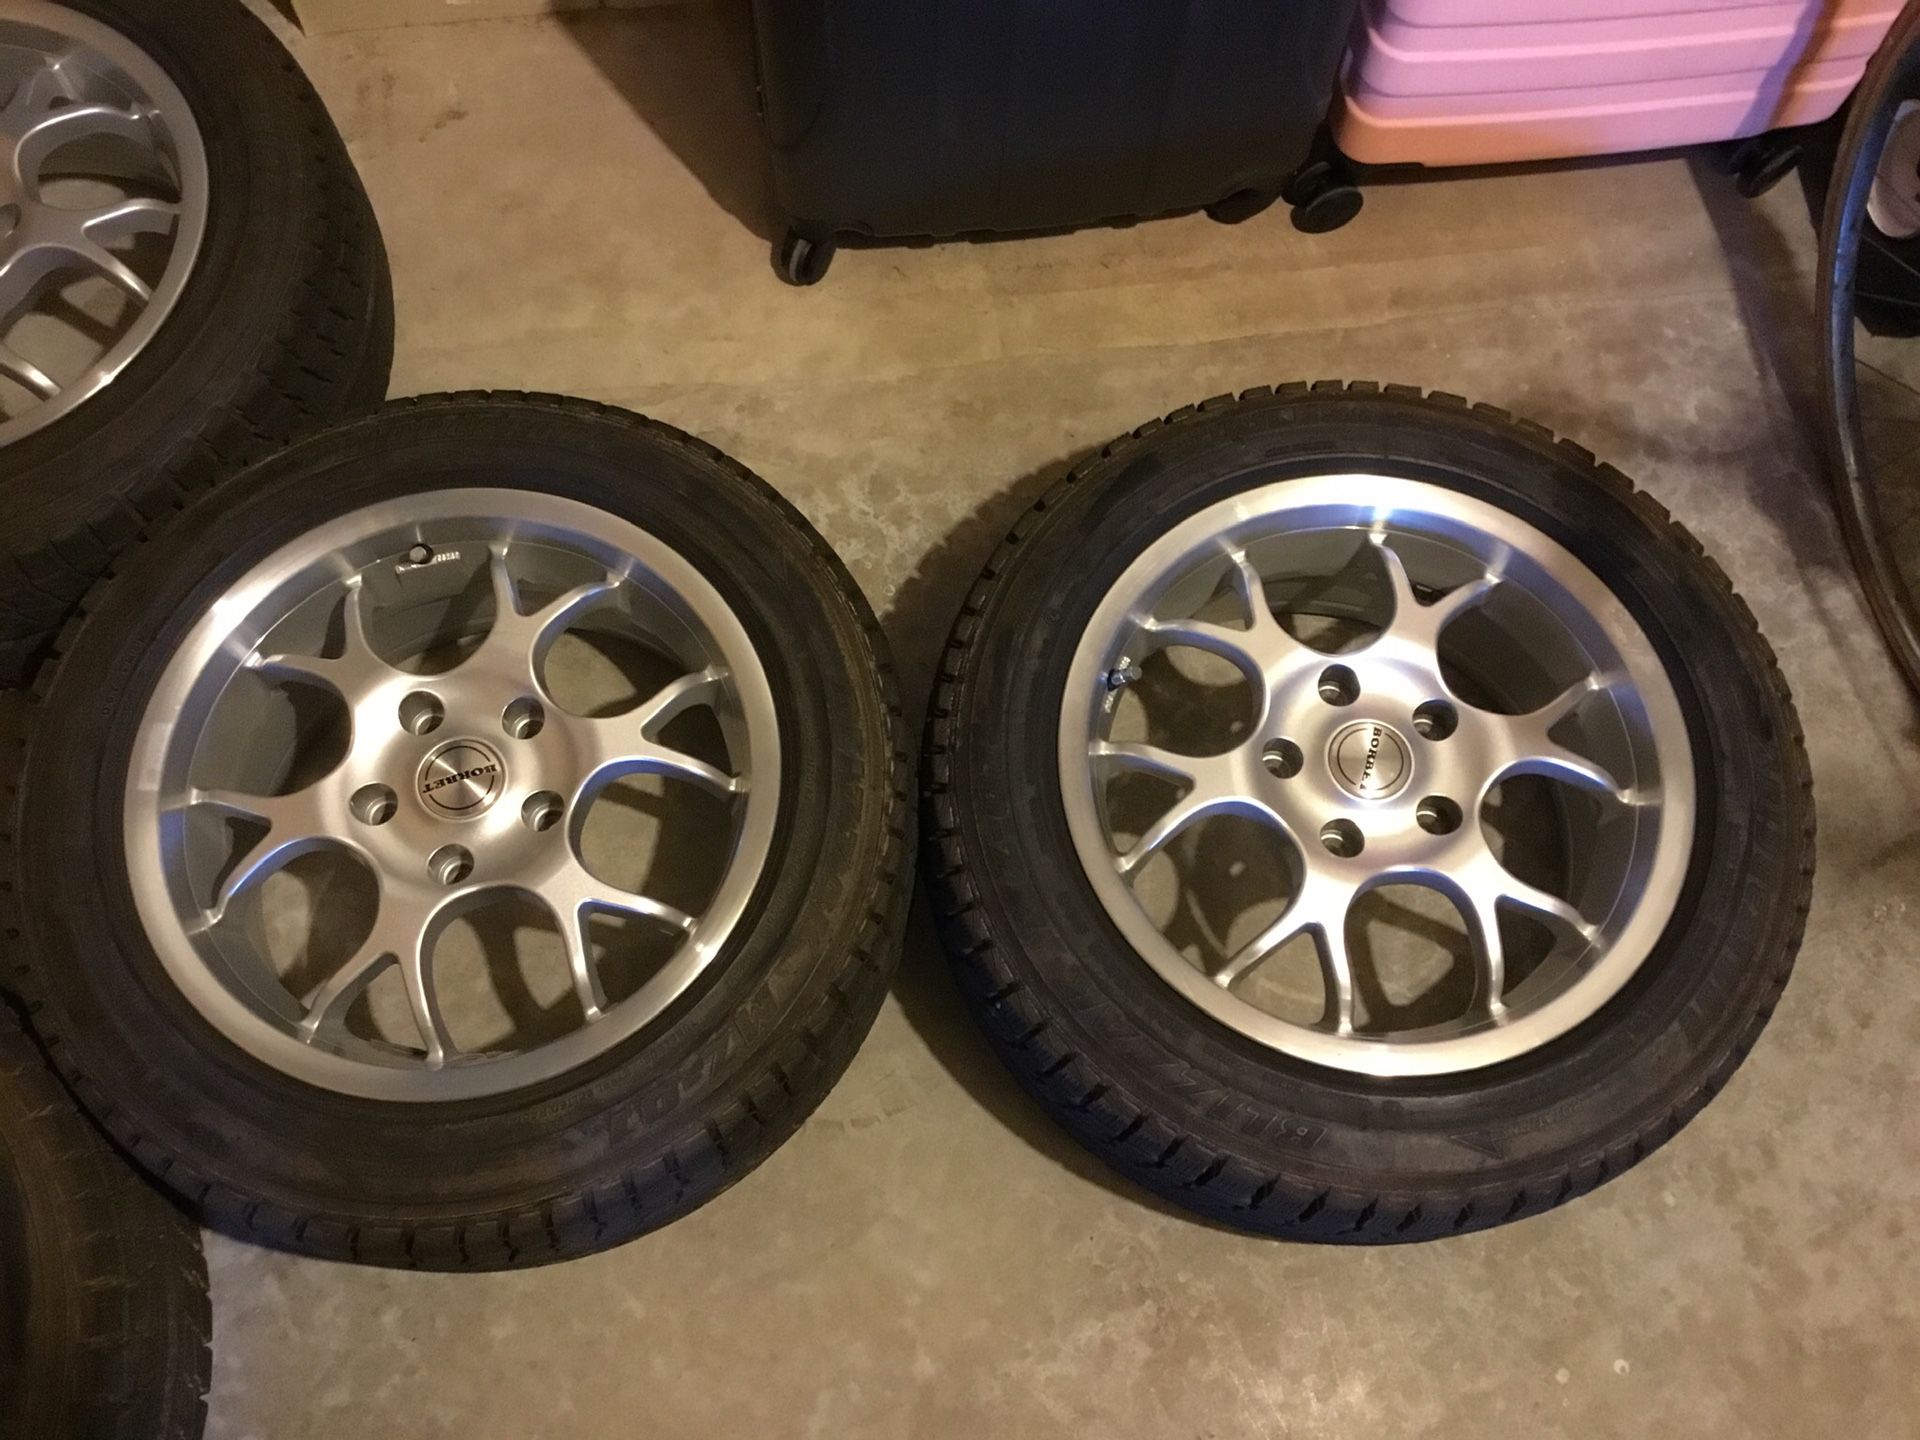 Slightly used BMW All wheel drive 3 series silver rims and tires